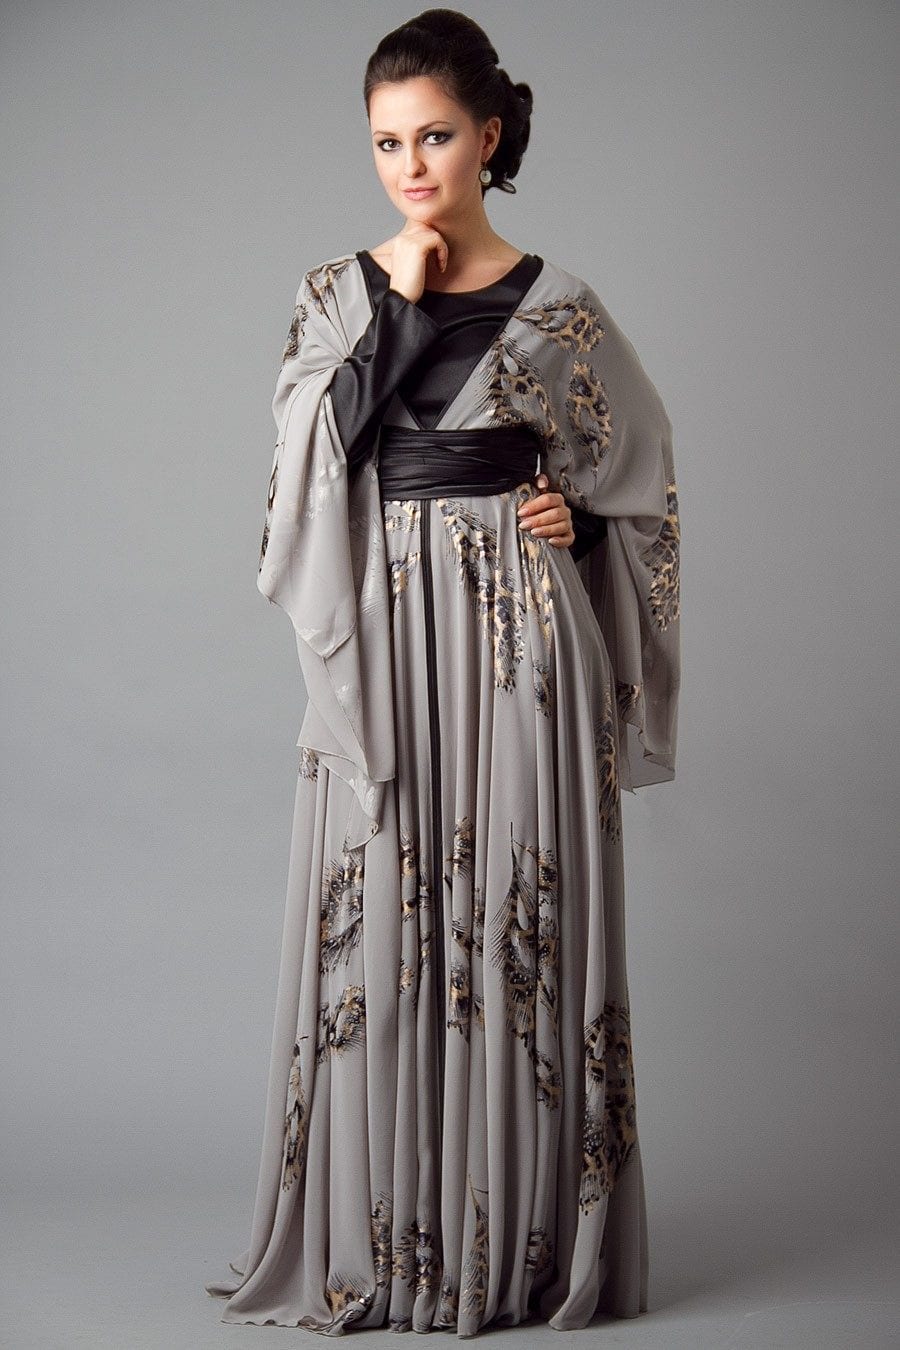 15 Most Popular Dubai Style embroidered Abayas